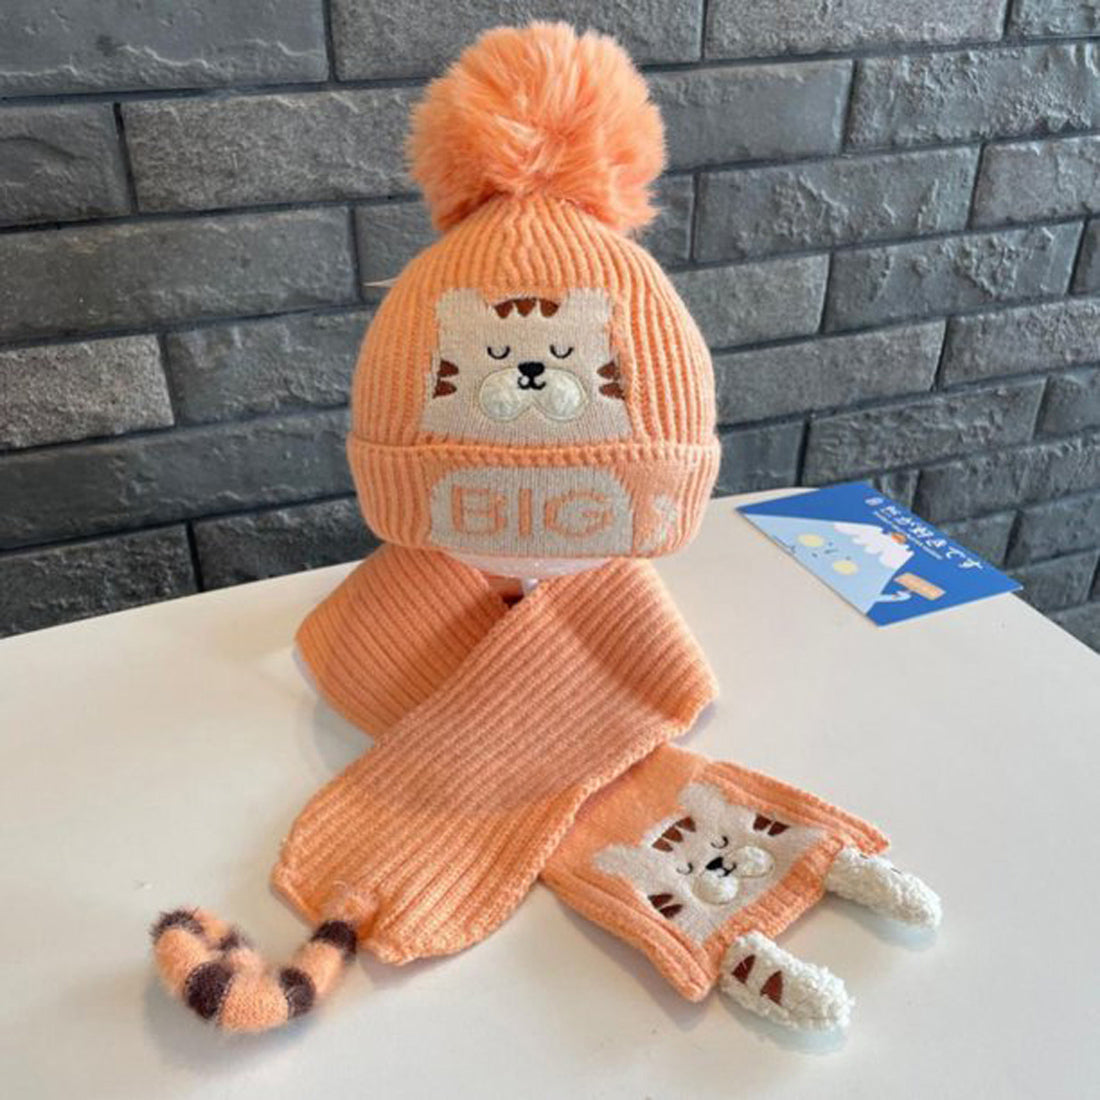 Orange Tiger woven Stretchable Woolen Winter Cap for Kids with Matching Neck Muffler Set (3-10yrs)